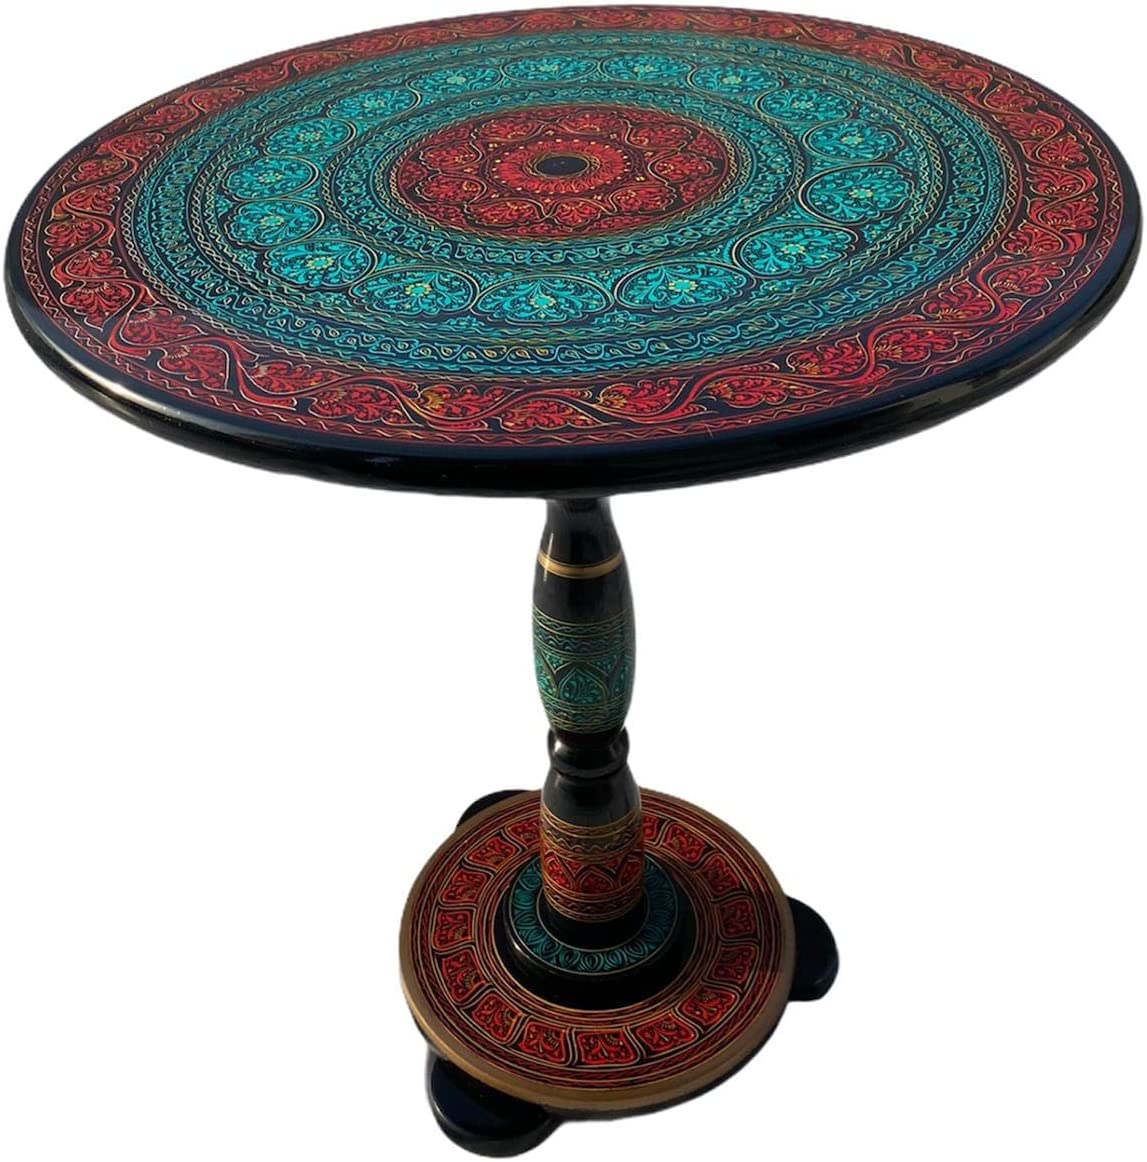 Green and Red Table - 18 inch I Handcrafted Round Table for Living Room or End Table for Bedroom Beautiful Gift for Home Invitations I Nakshi Art